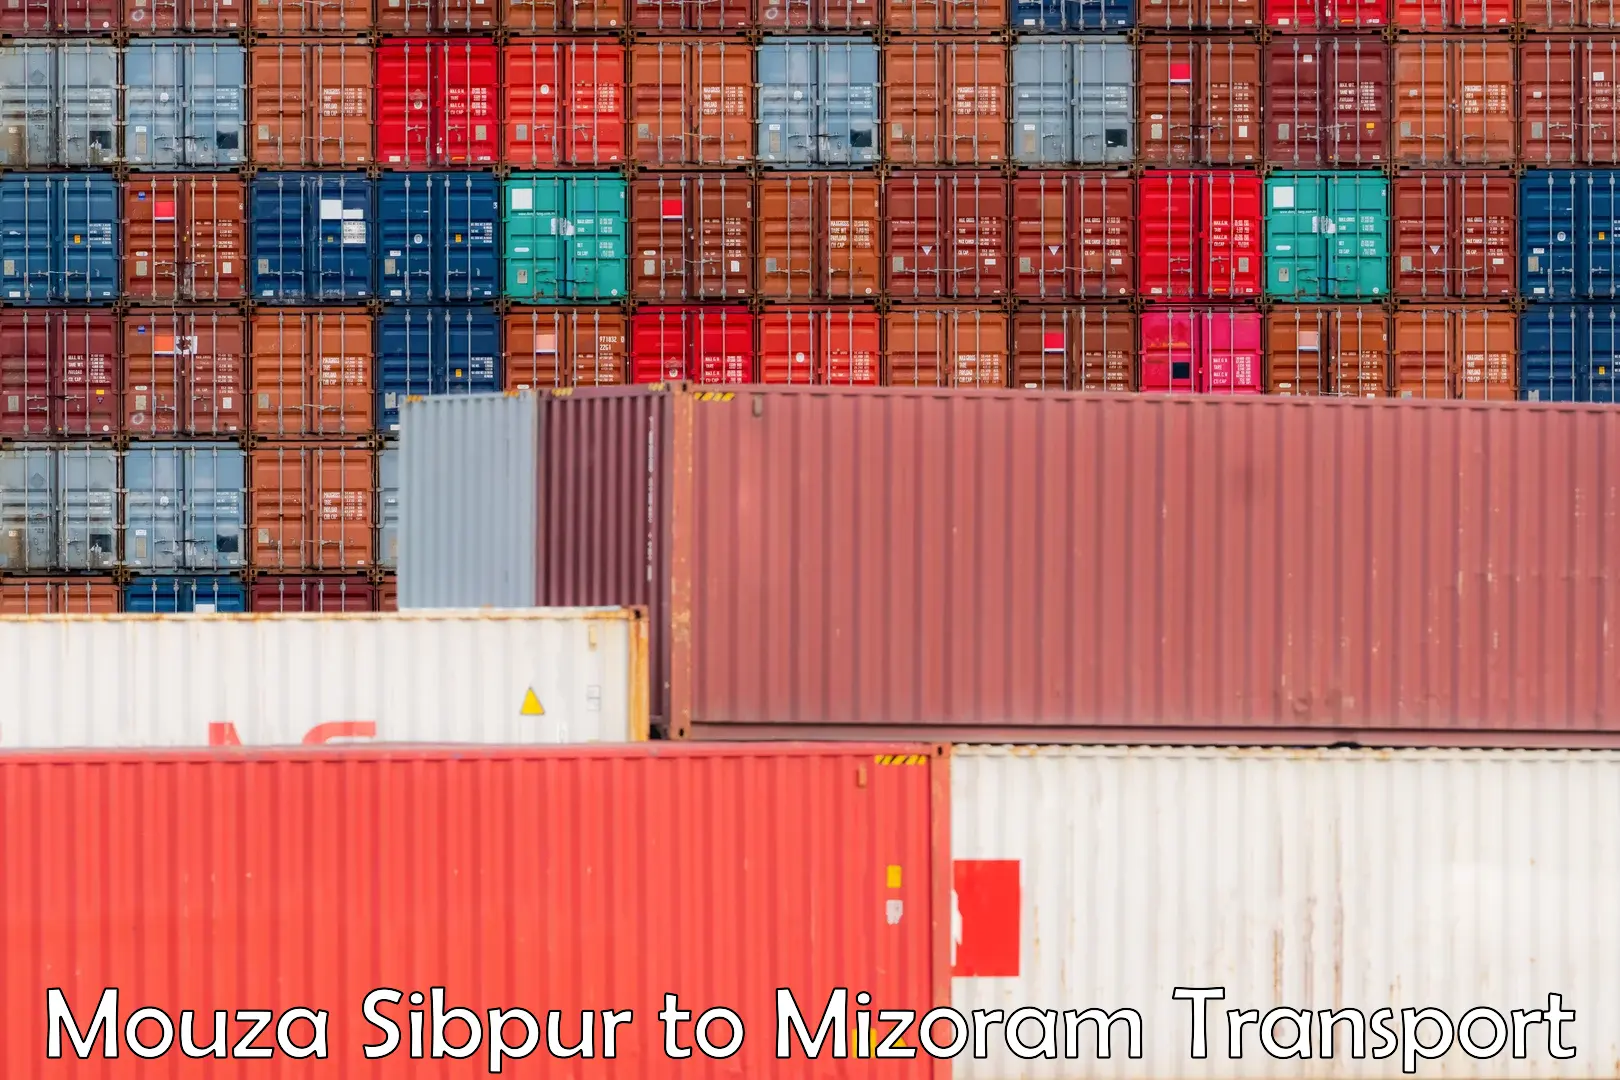 Container transport service Mouza Sibpur to Siaha